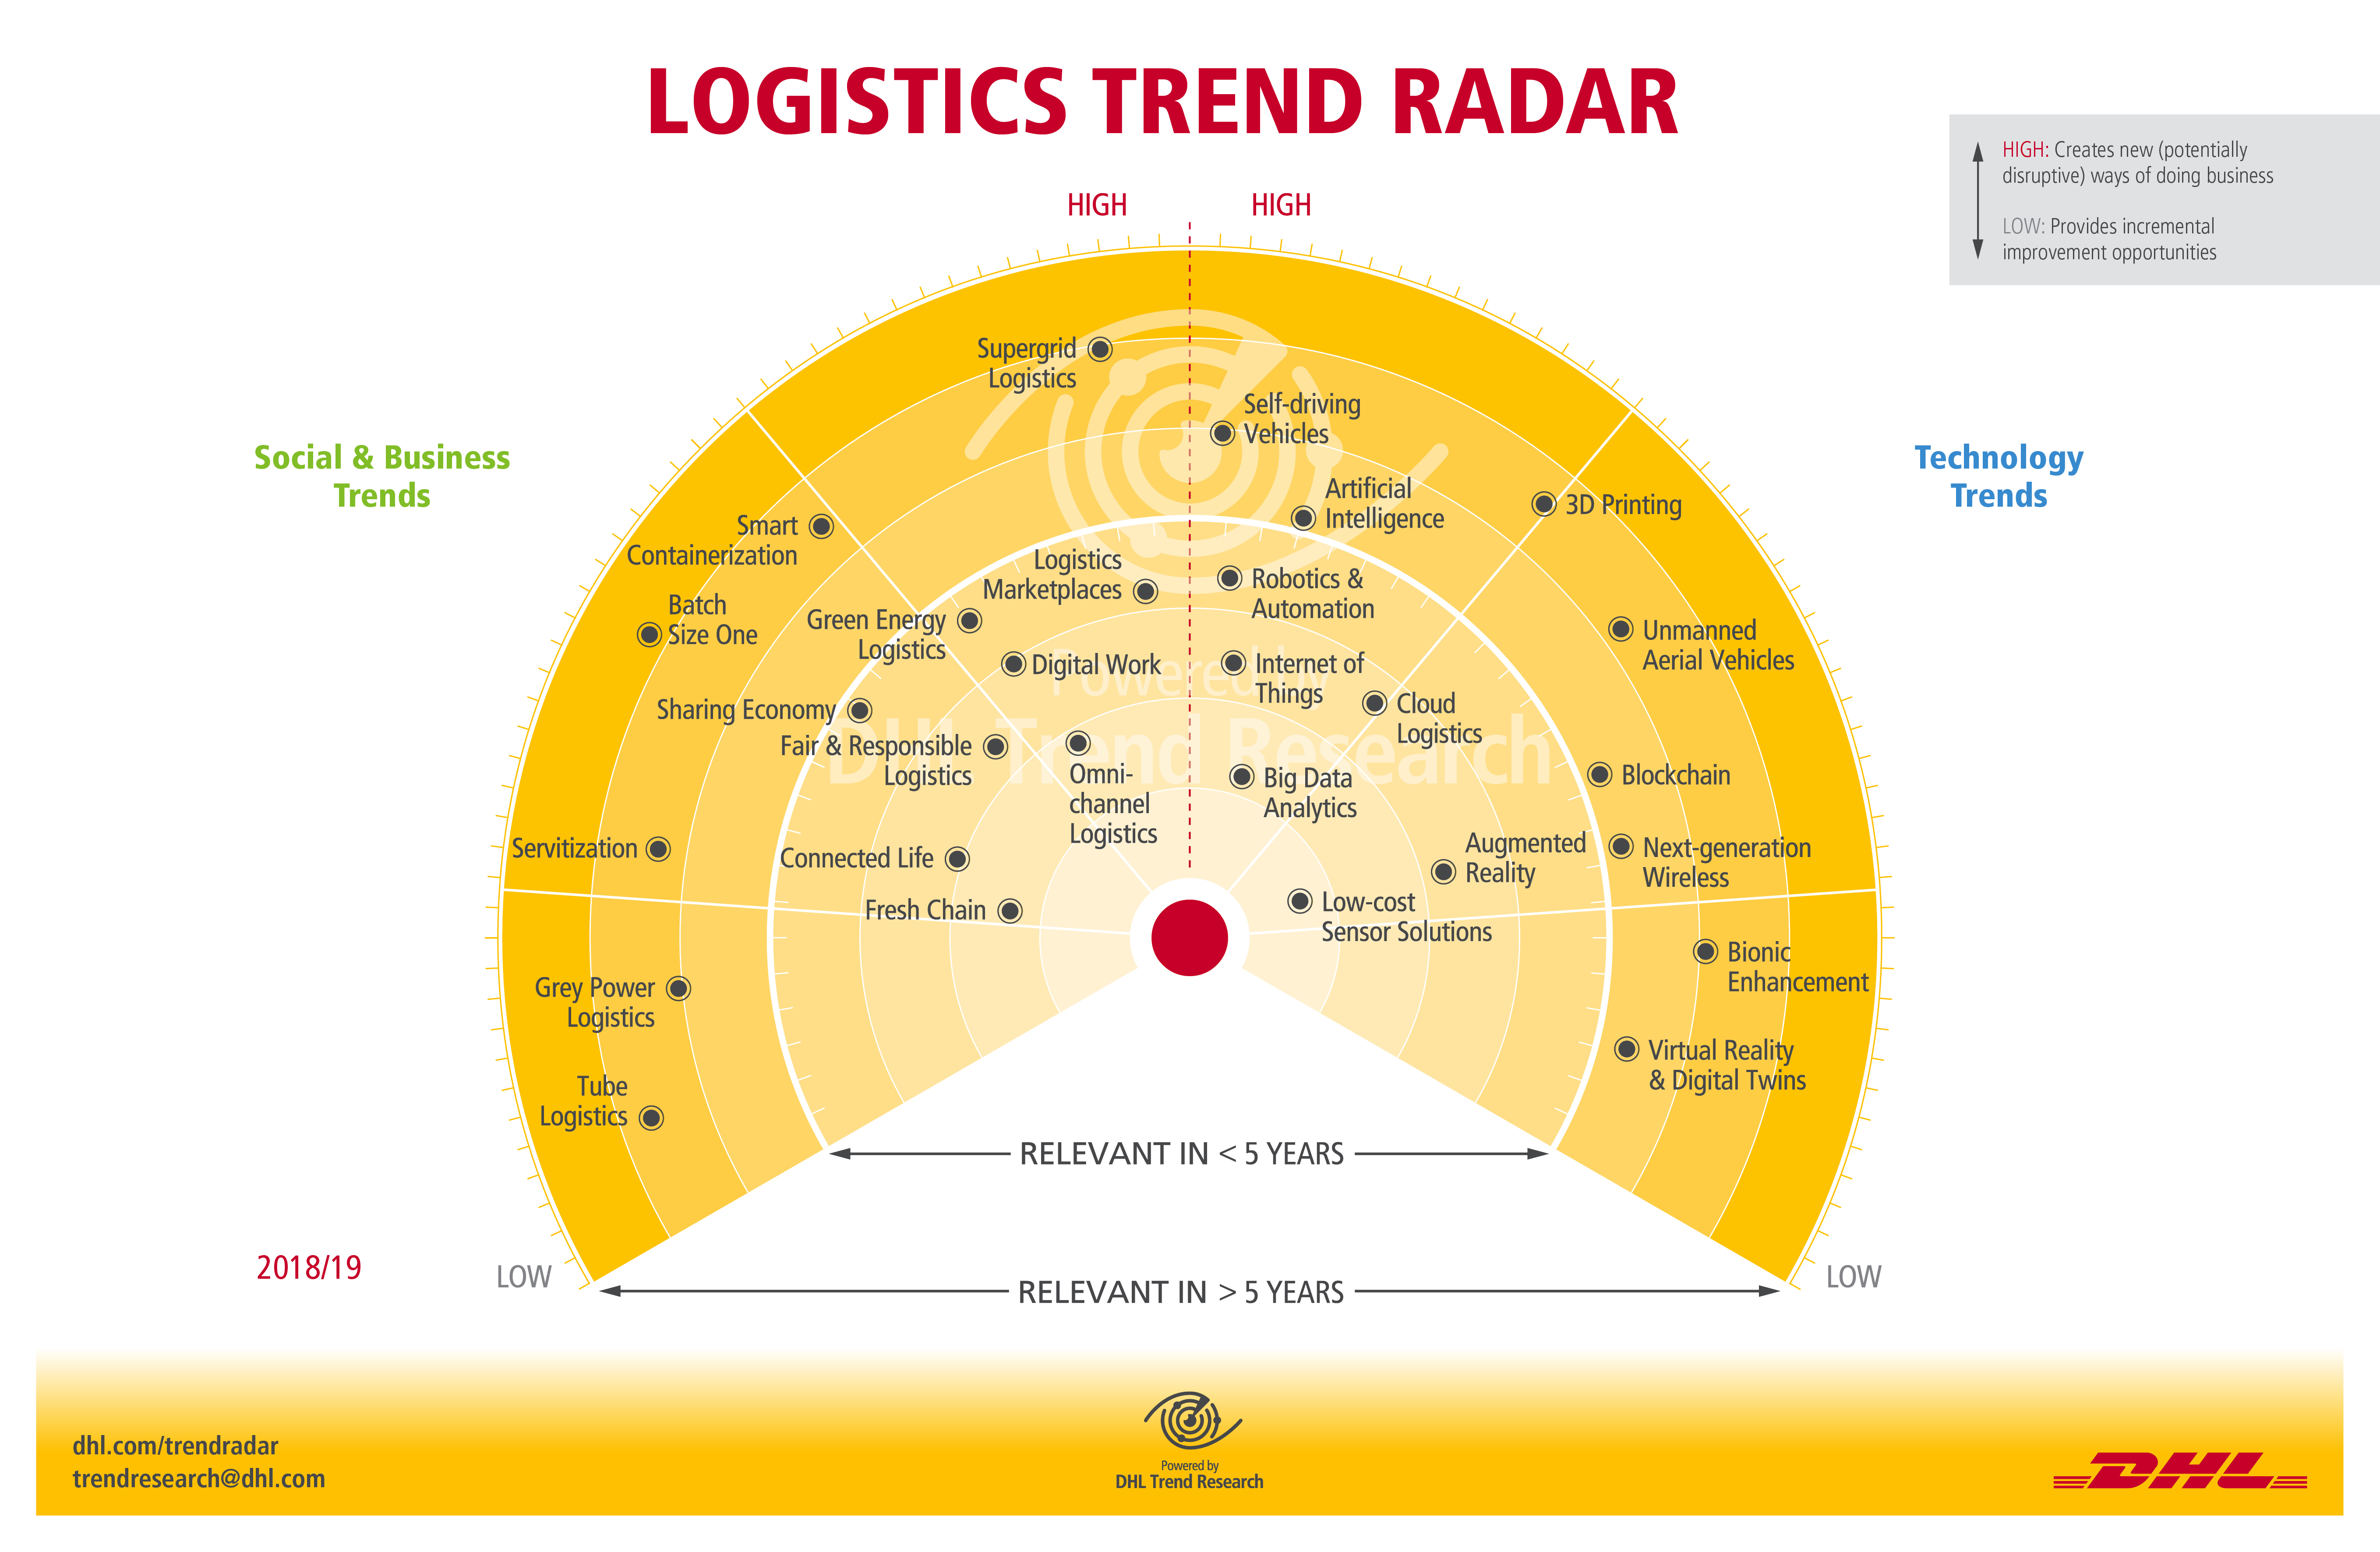 dhl-identifies-key-trends-for-the-delivery-sector-parcel-and-postal-technology-international